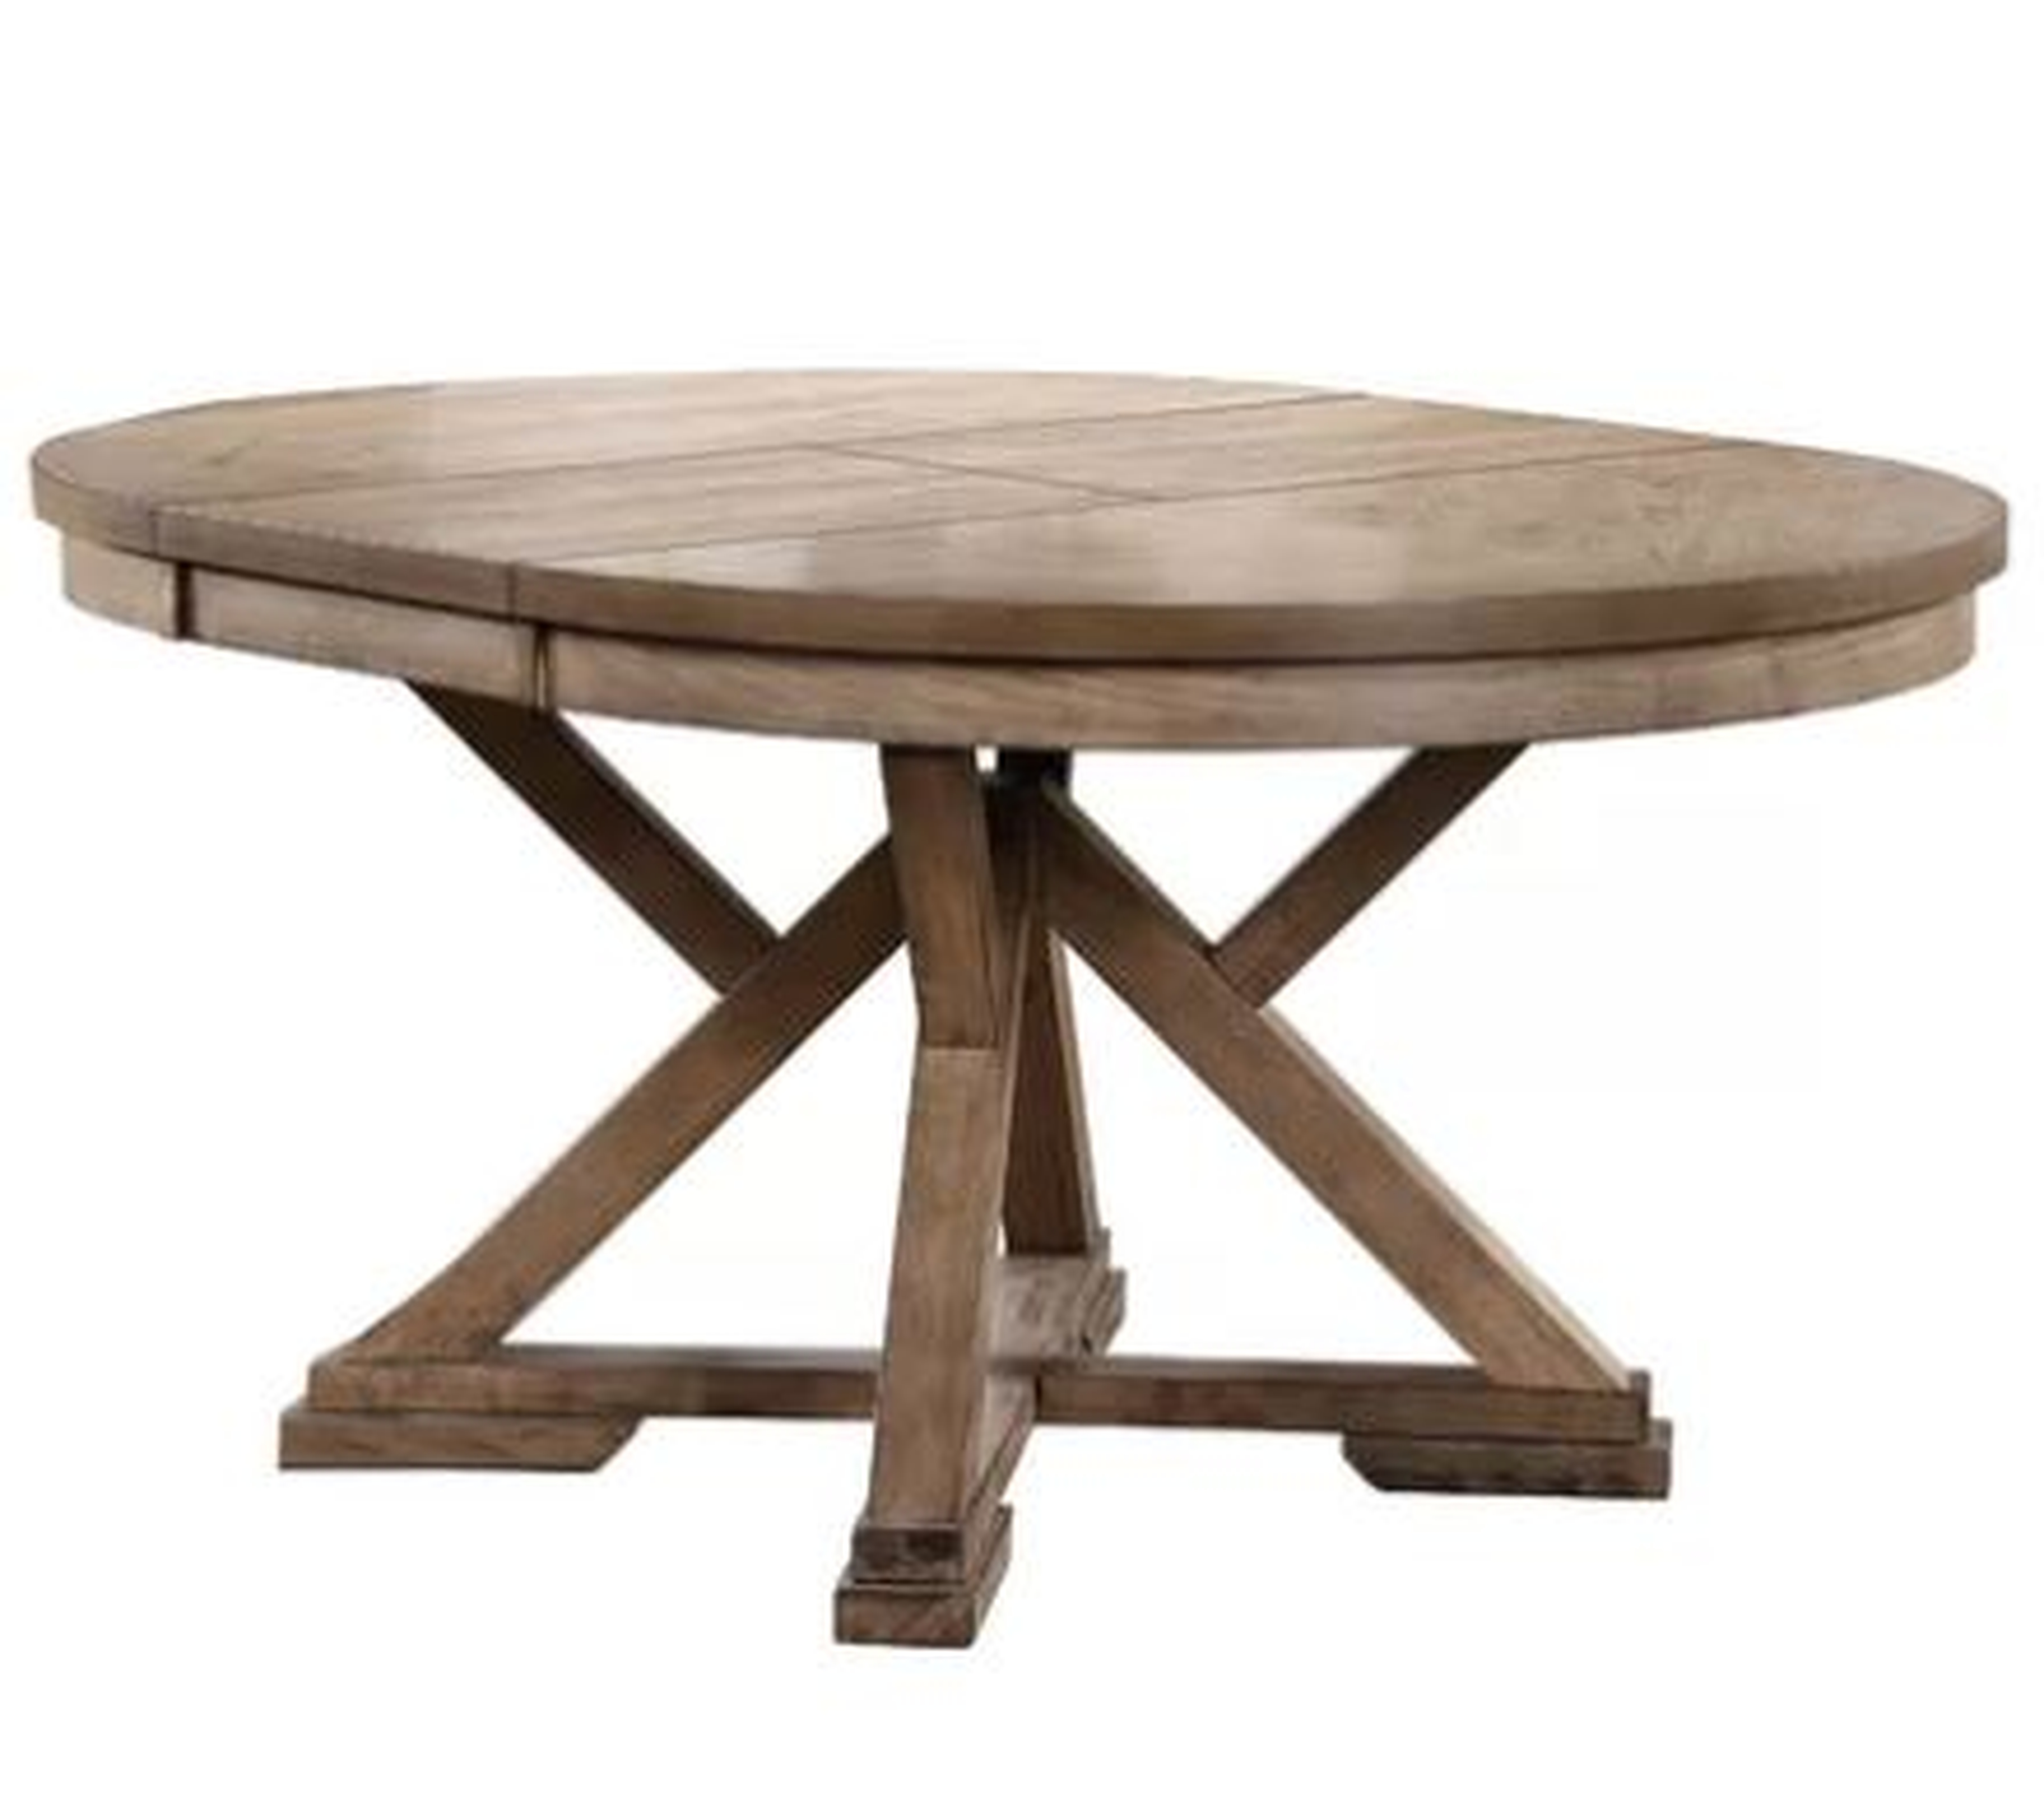 Carnspindle Extendable Dining Table - Birch Lane